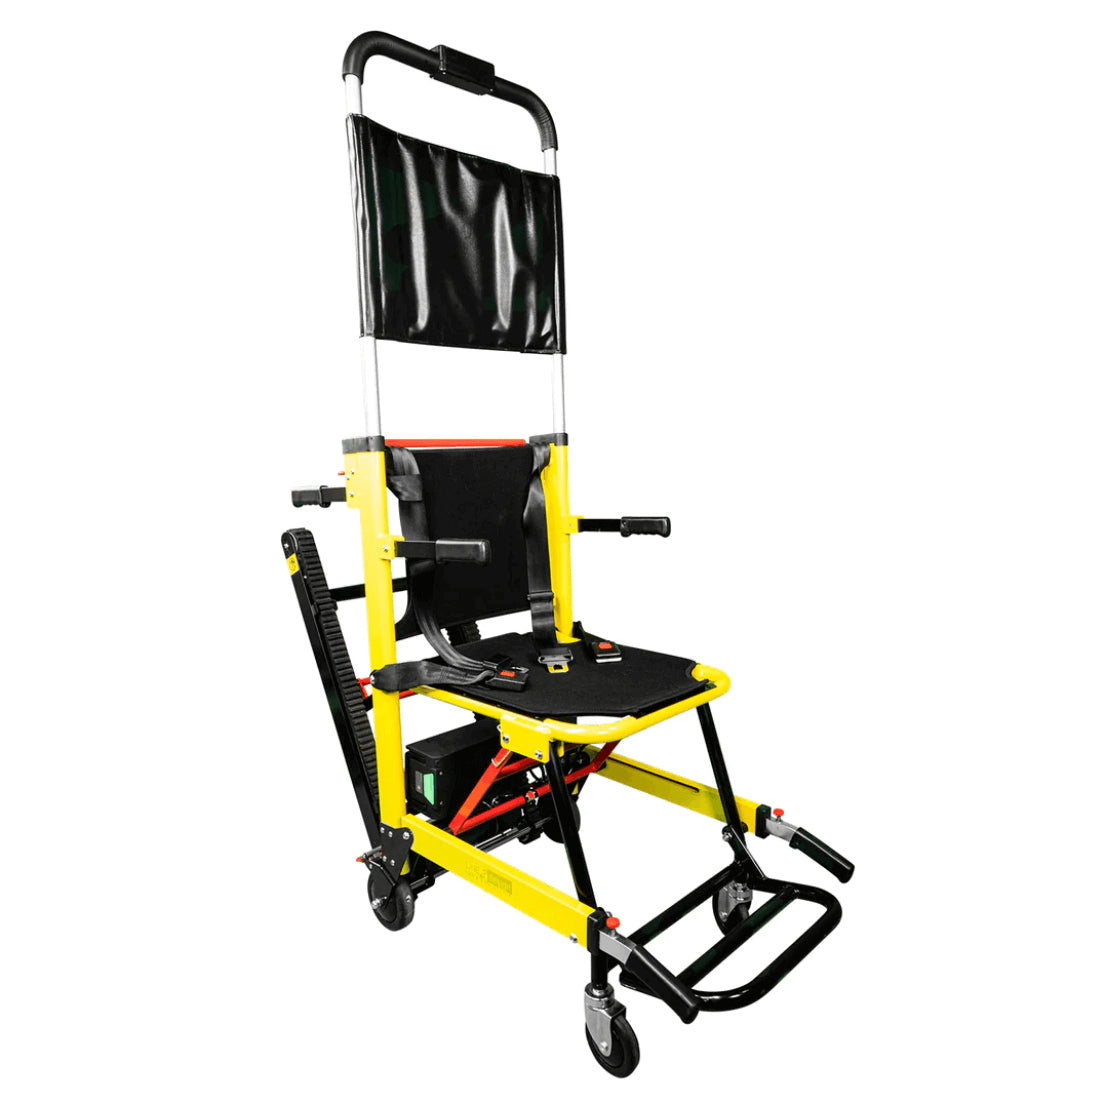 LINE2design Motorized Mobile Stair Chair Lift Climber-70019-Y-BAT